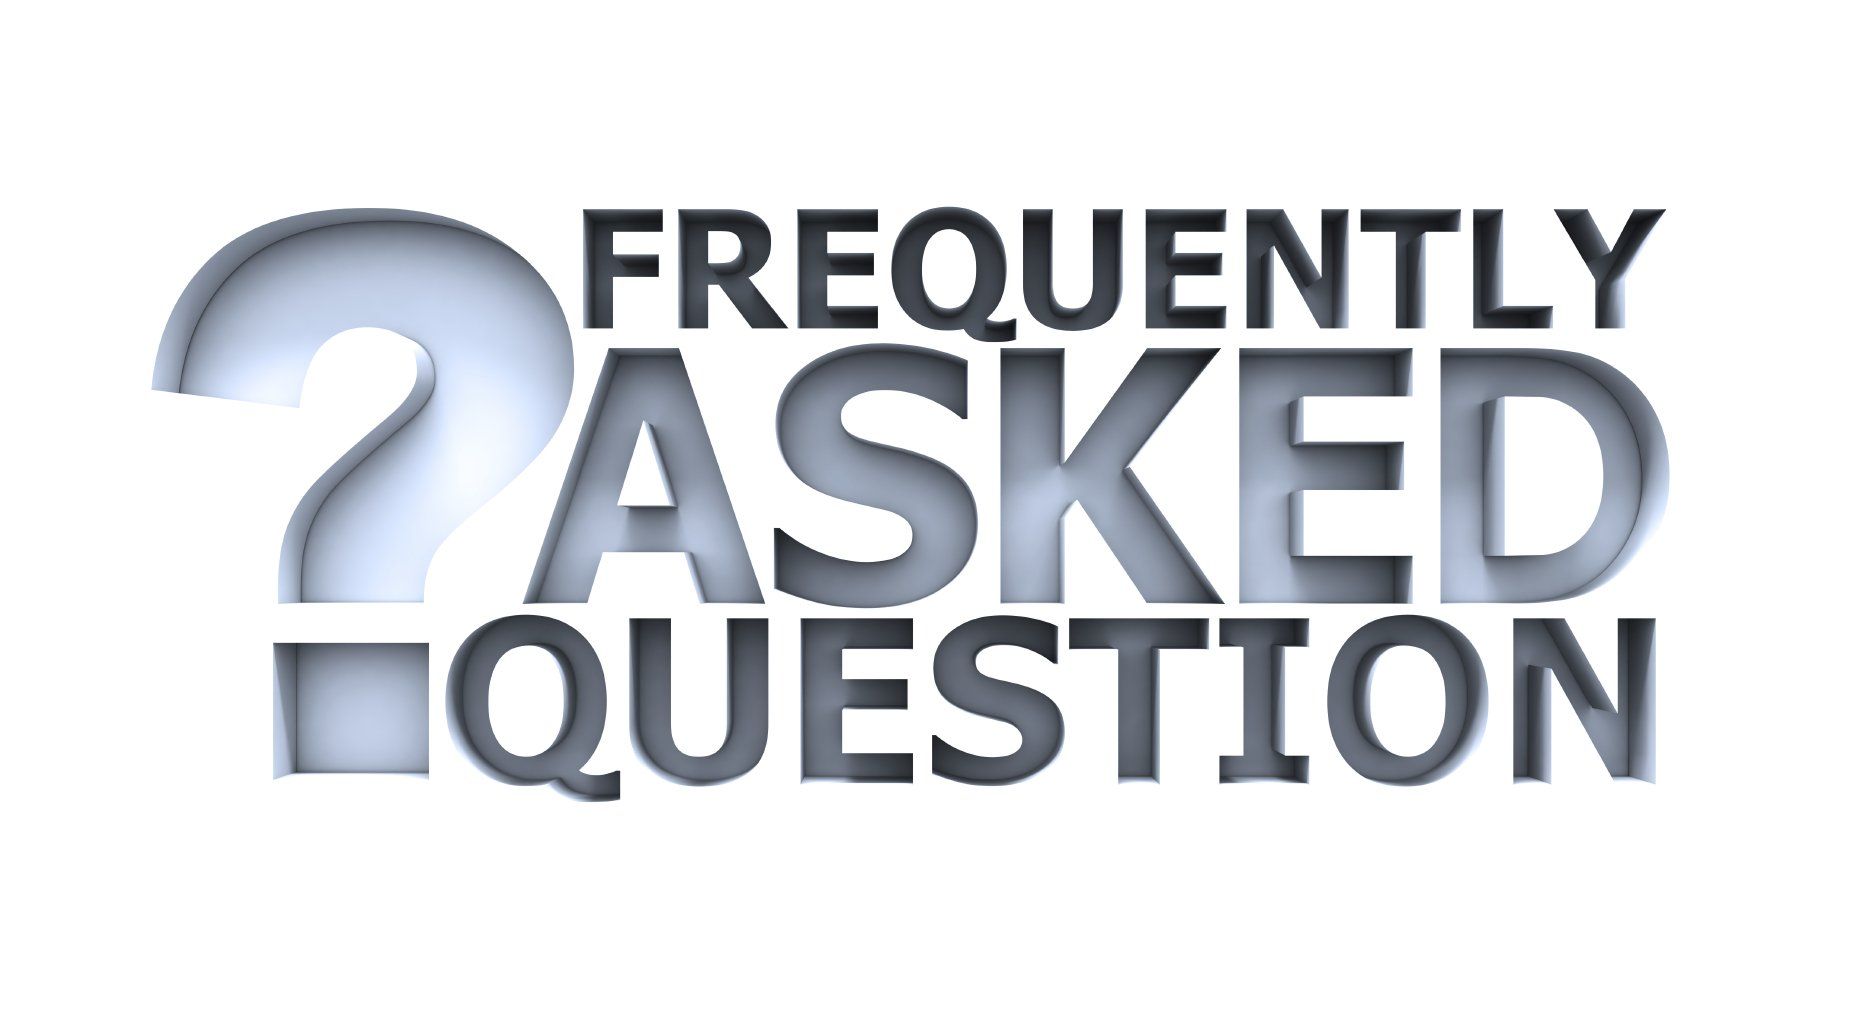 Frequently asked question graphiic